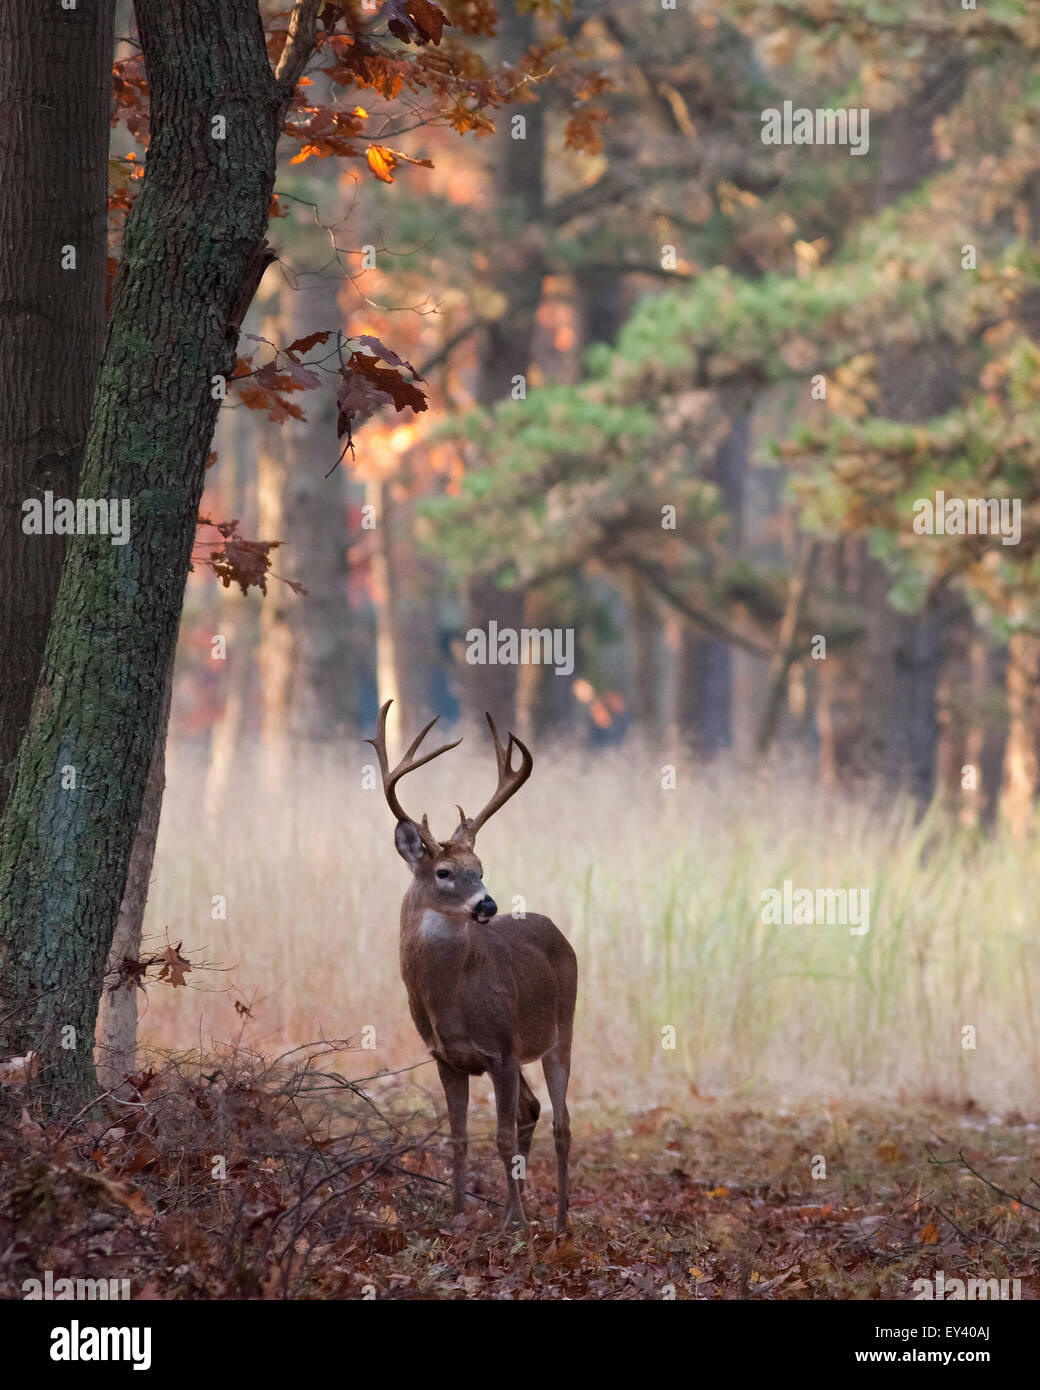 Male deer with antlers in autumn foliage. Stock Photo